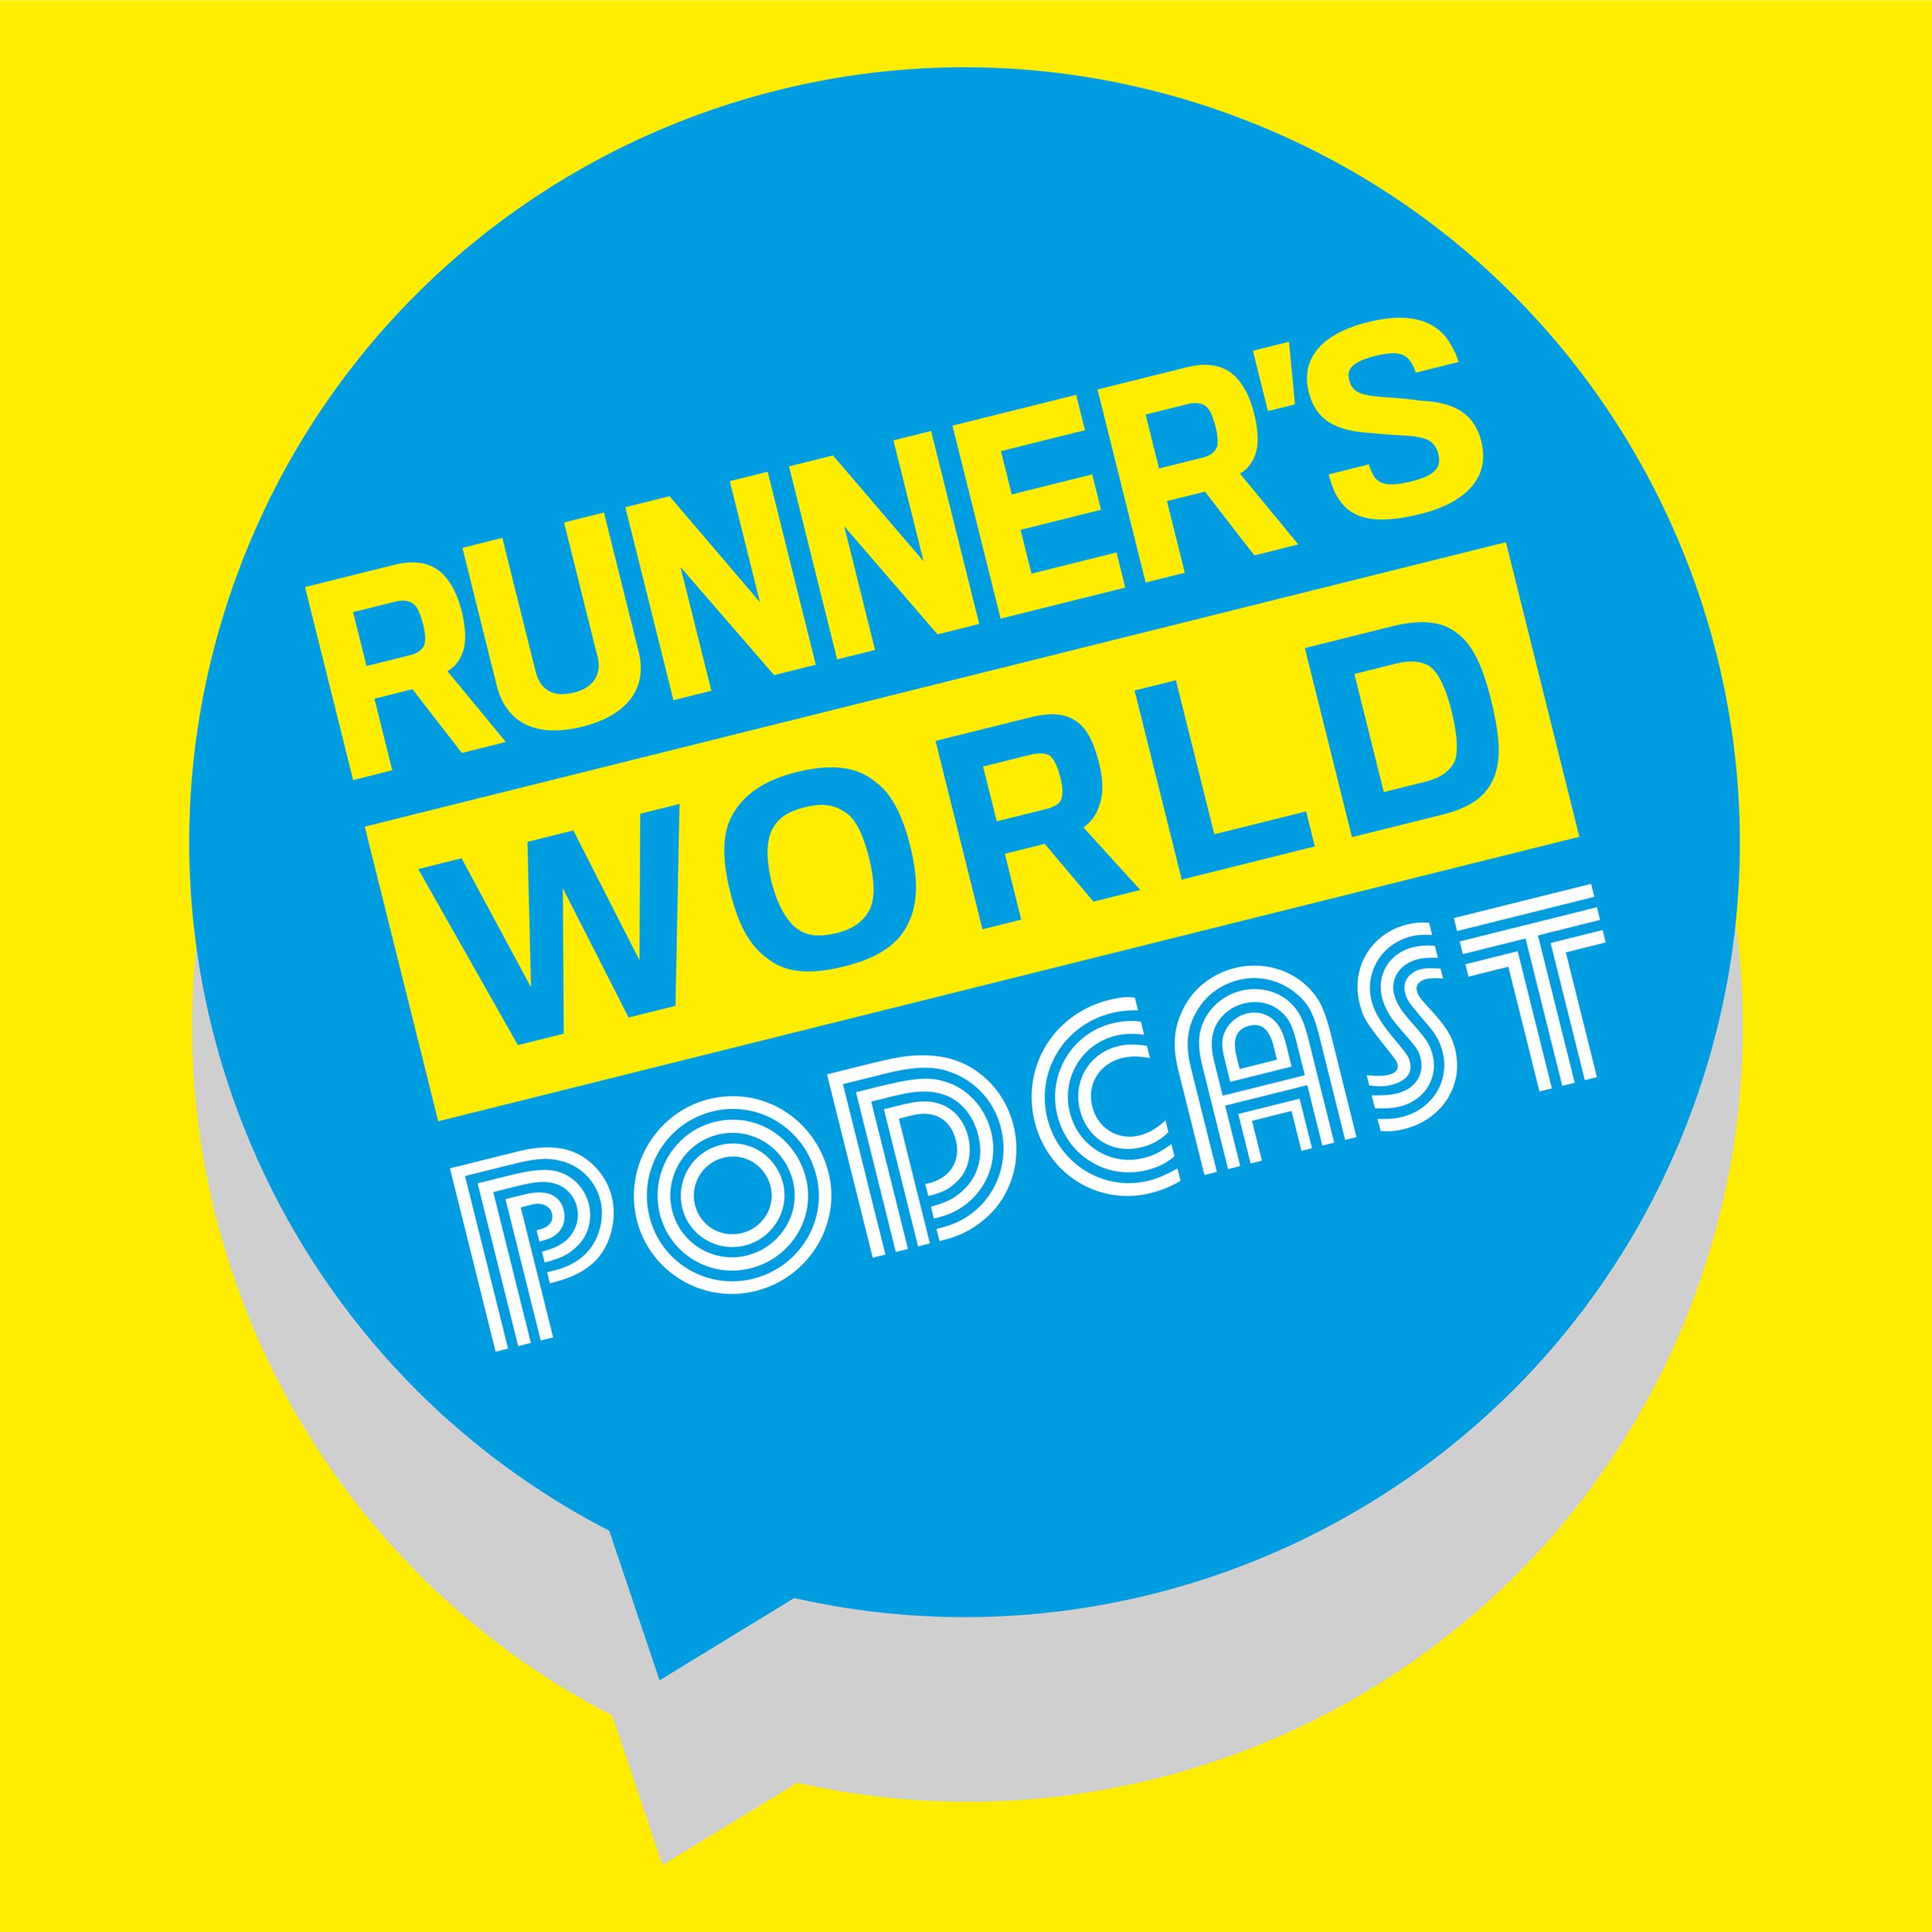 We discuss ultra running in China, with James Poole